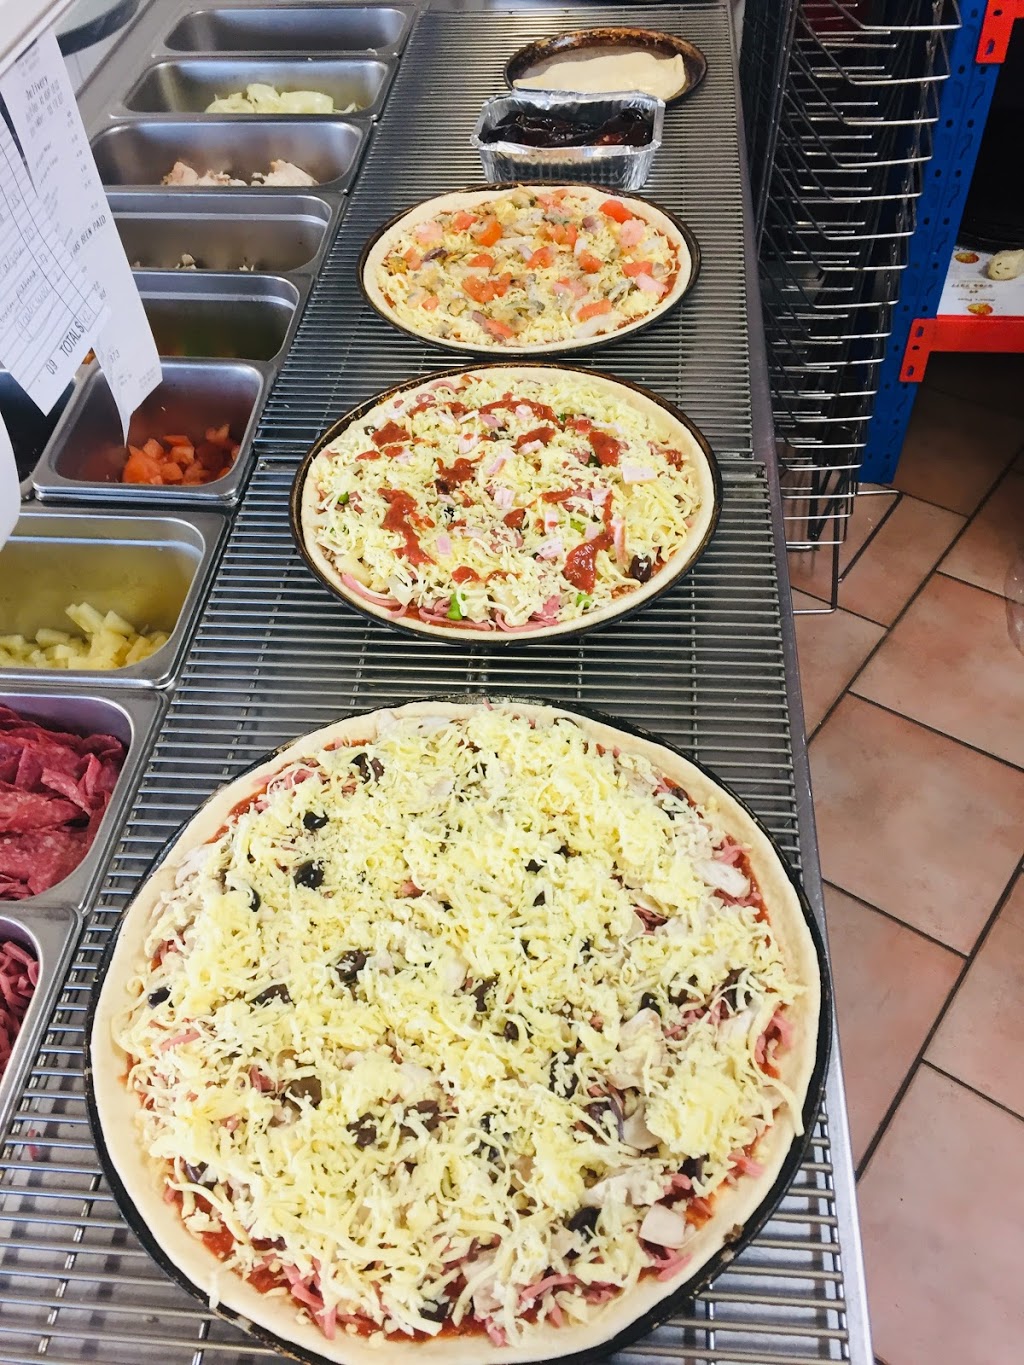 Olive and Pineapple Pizza - Best pizzas in Frankston | meal takeaway | 2/151 Beach St, Frankston VIC 3199, Australia | 0410031357 OR +61 410 031 357